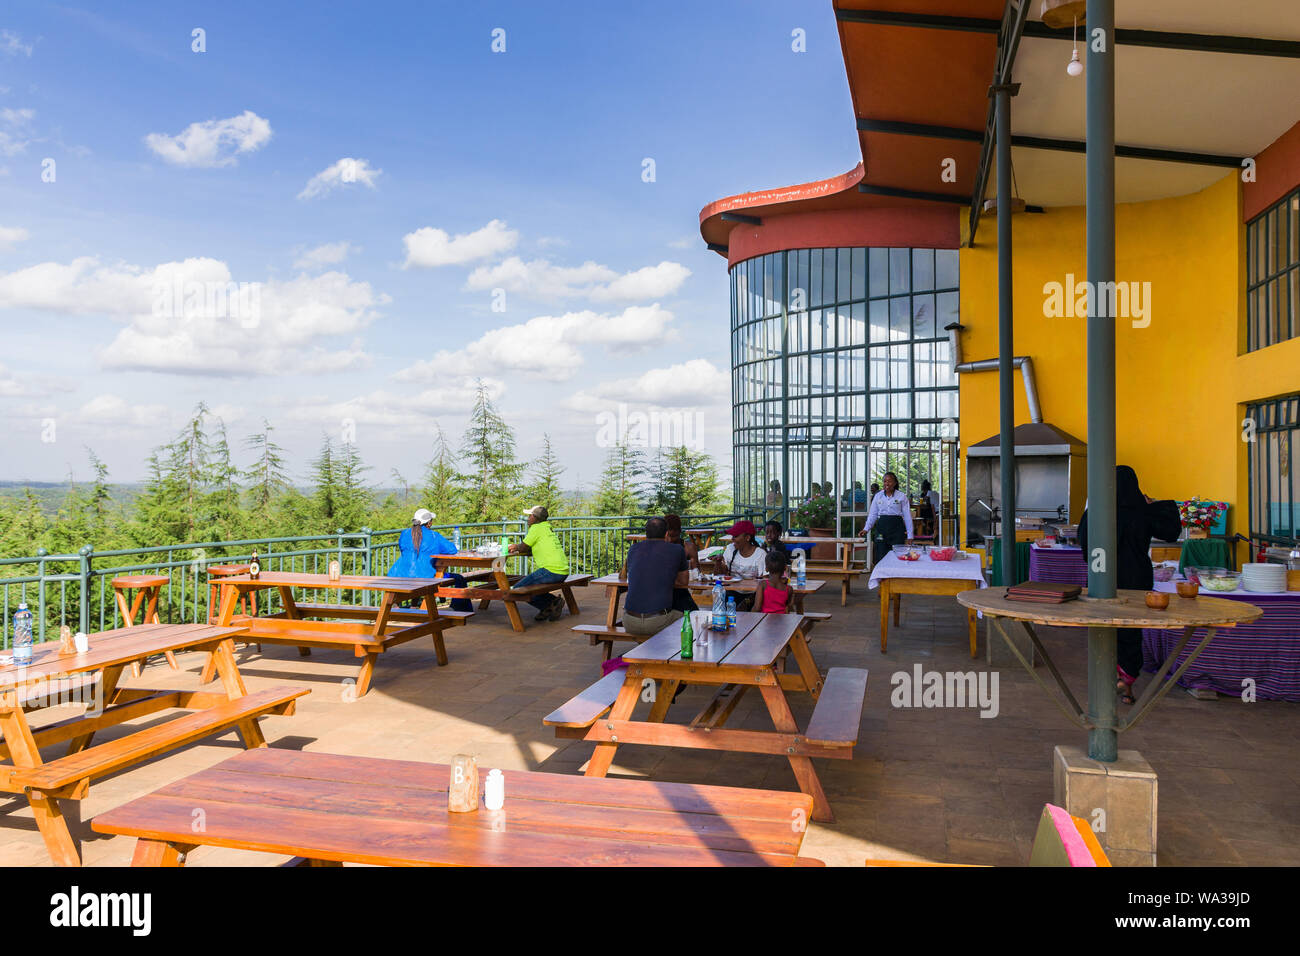 Exterior seating area of The Forest main building with people sat enjoying the view, Kimende, Kenya Stock Photo